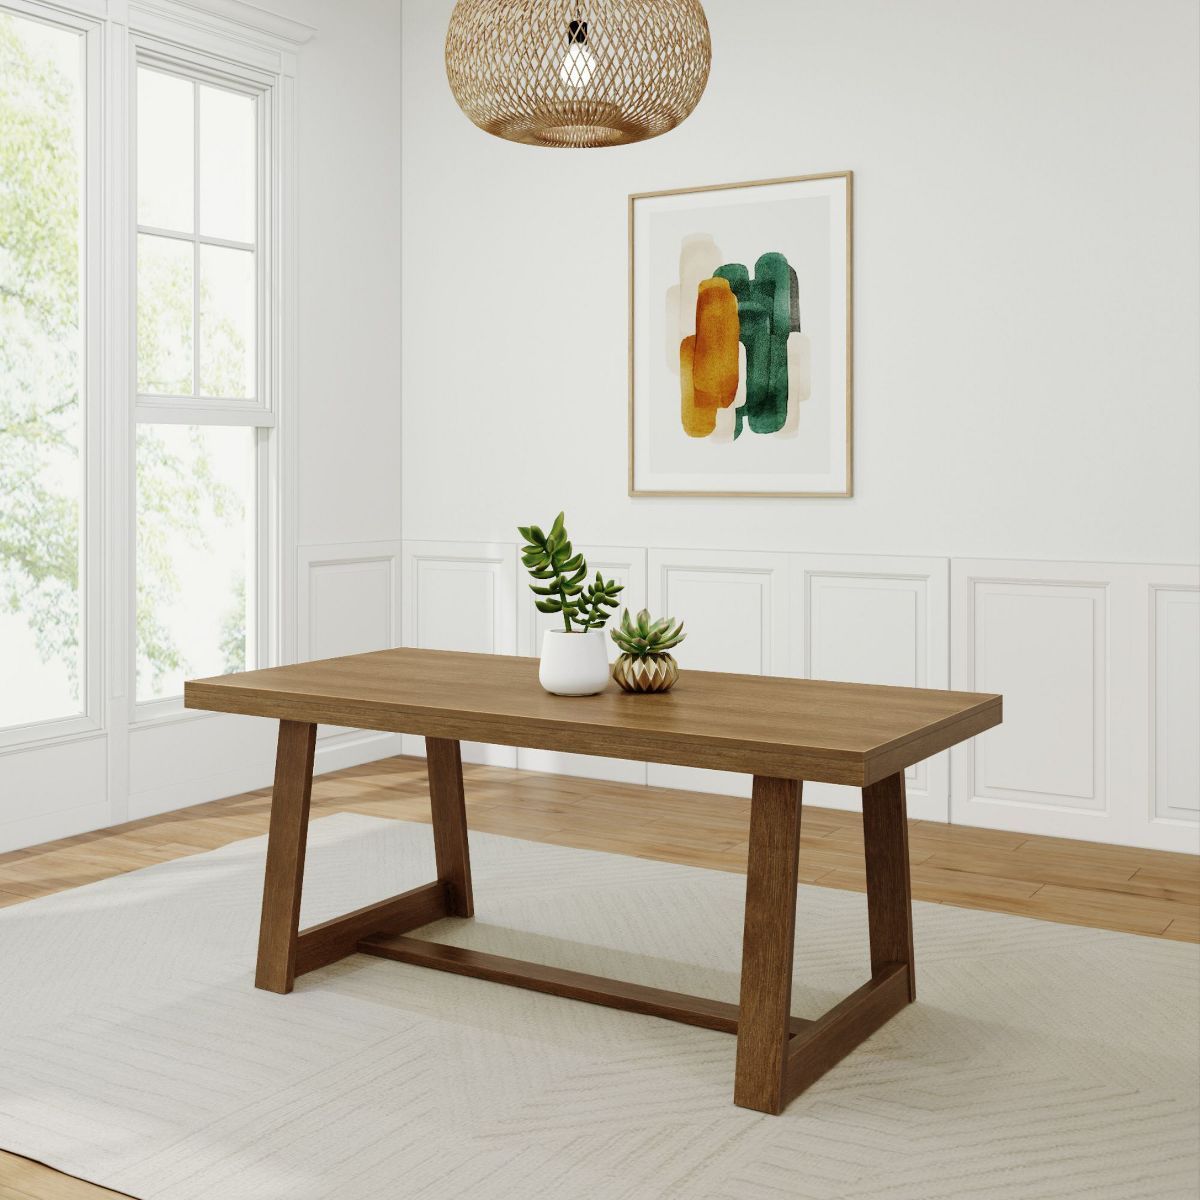 Plank+Beam Farmhouse Dining Table, Solid Wood Rectangular Kitchen Table for Kitchen/Dining Room, ... | Target